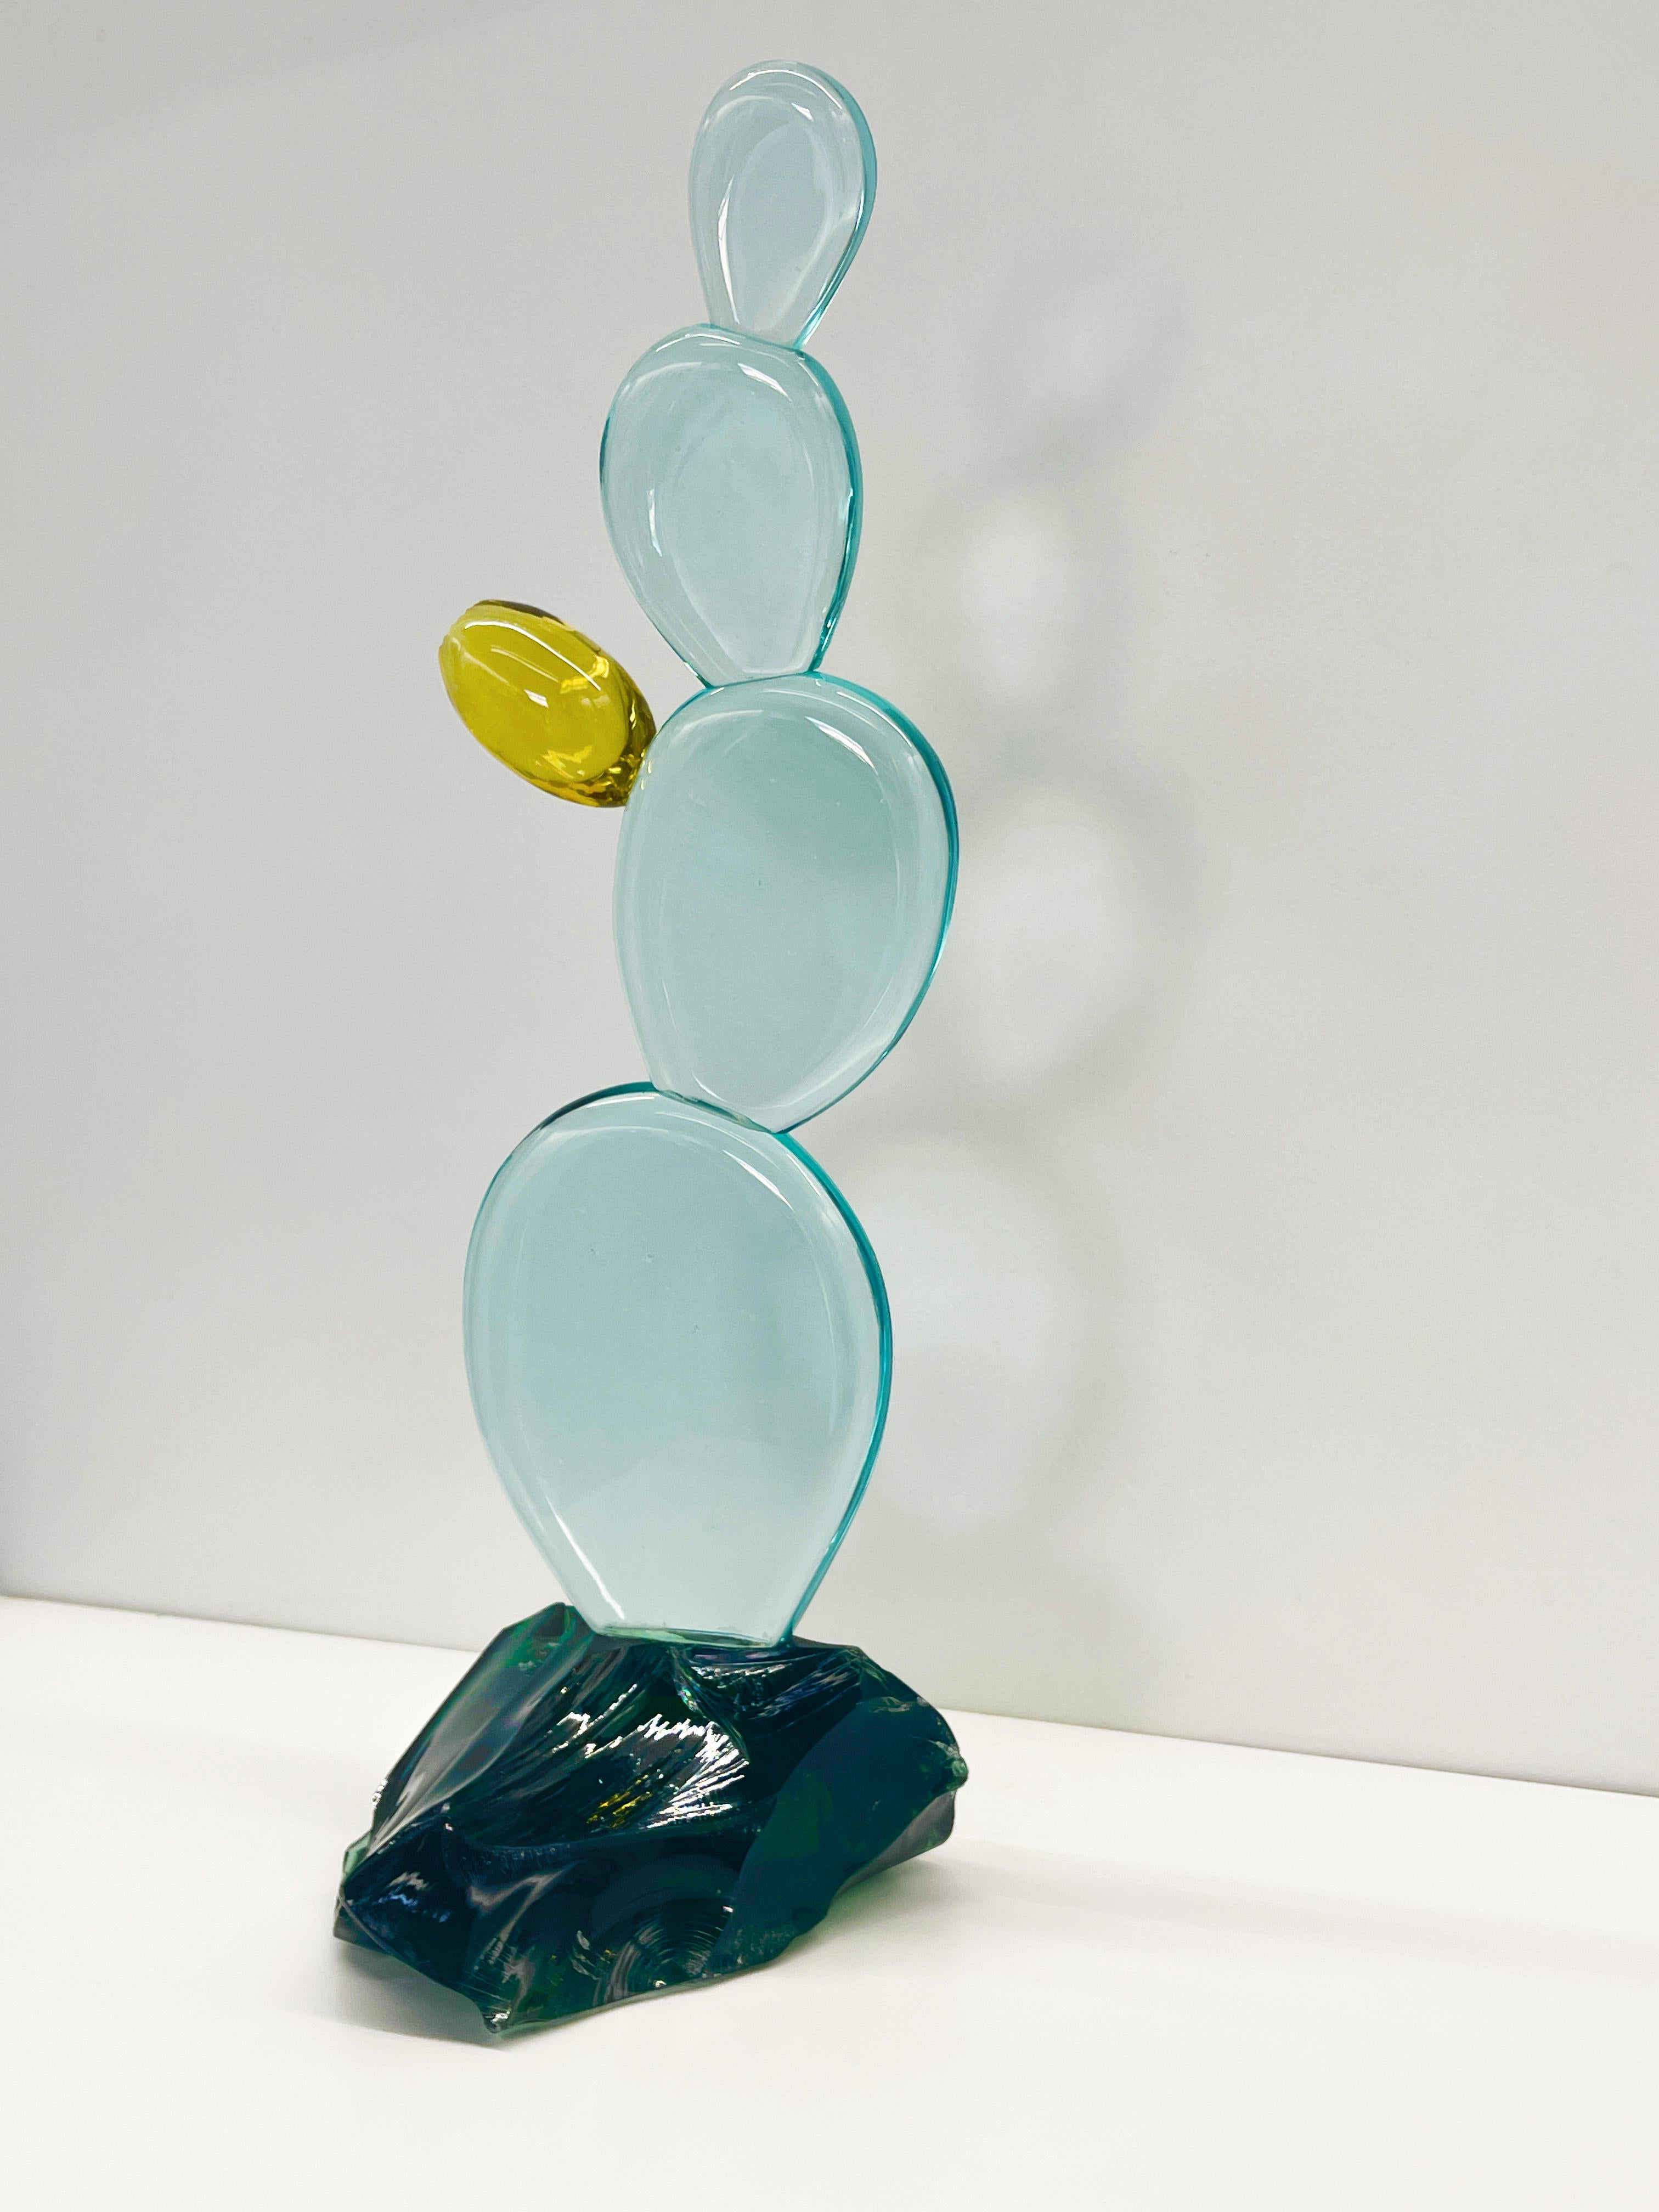 2021 Collection of handmade sculpture by Ghirò Studio.
'Cactus with flower' sculpture was made by hand working the crystal with extreme care and attention.
Each sculpture is unique and unrepeatable in fact it's impossible to create two perfectly